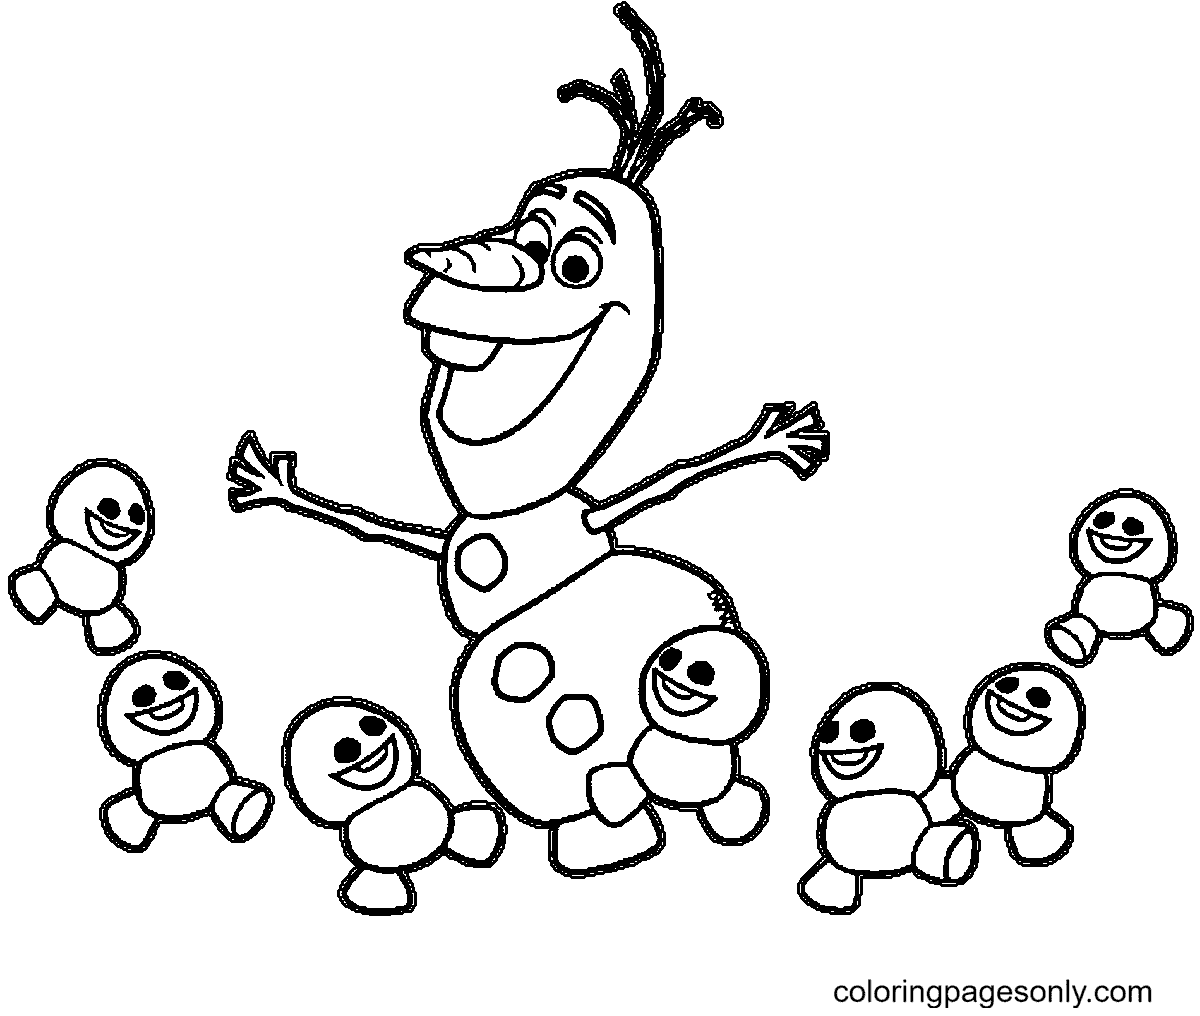 Olaf Dancing with Snowgies Coloring Page